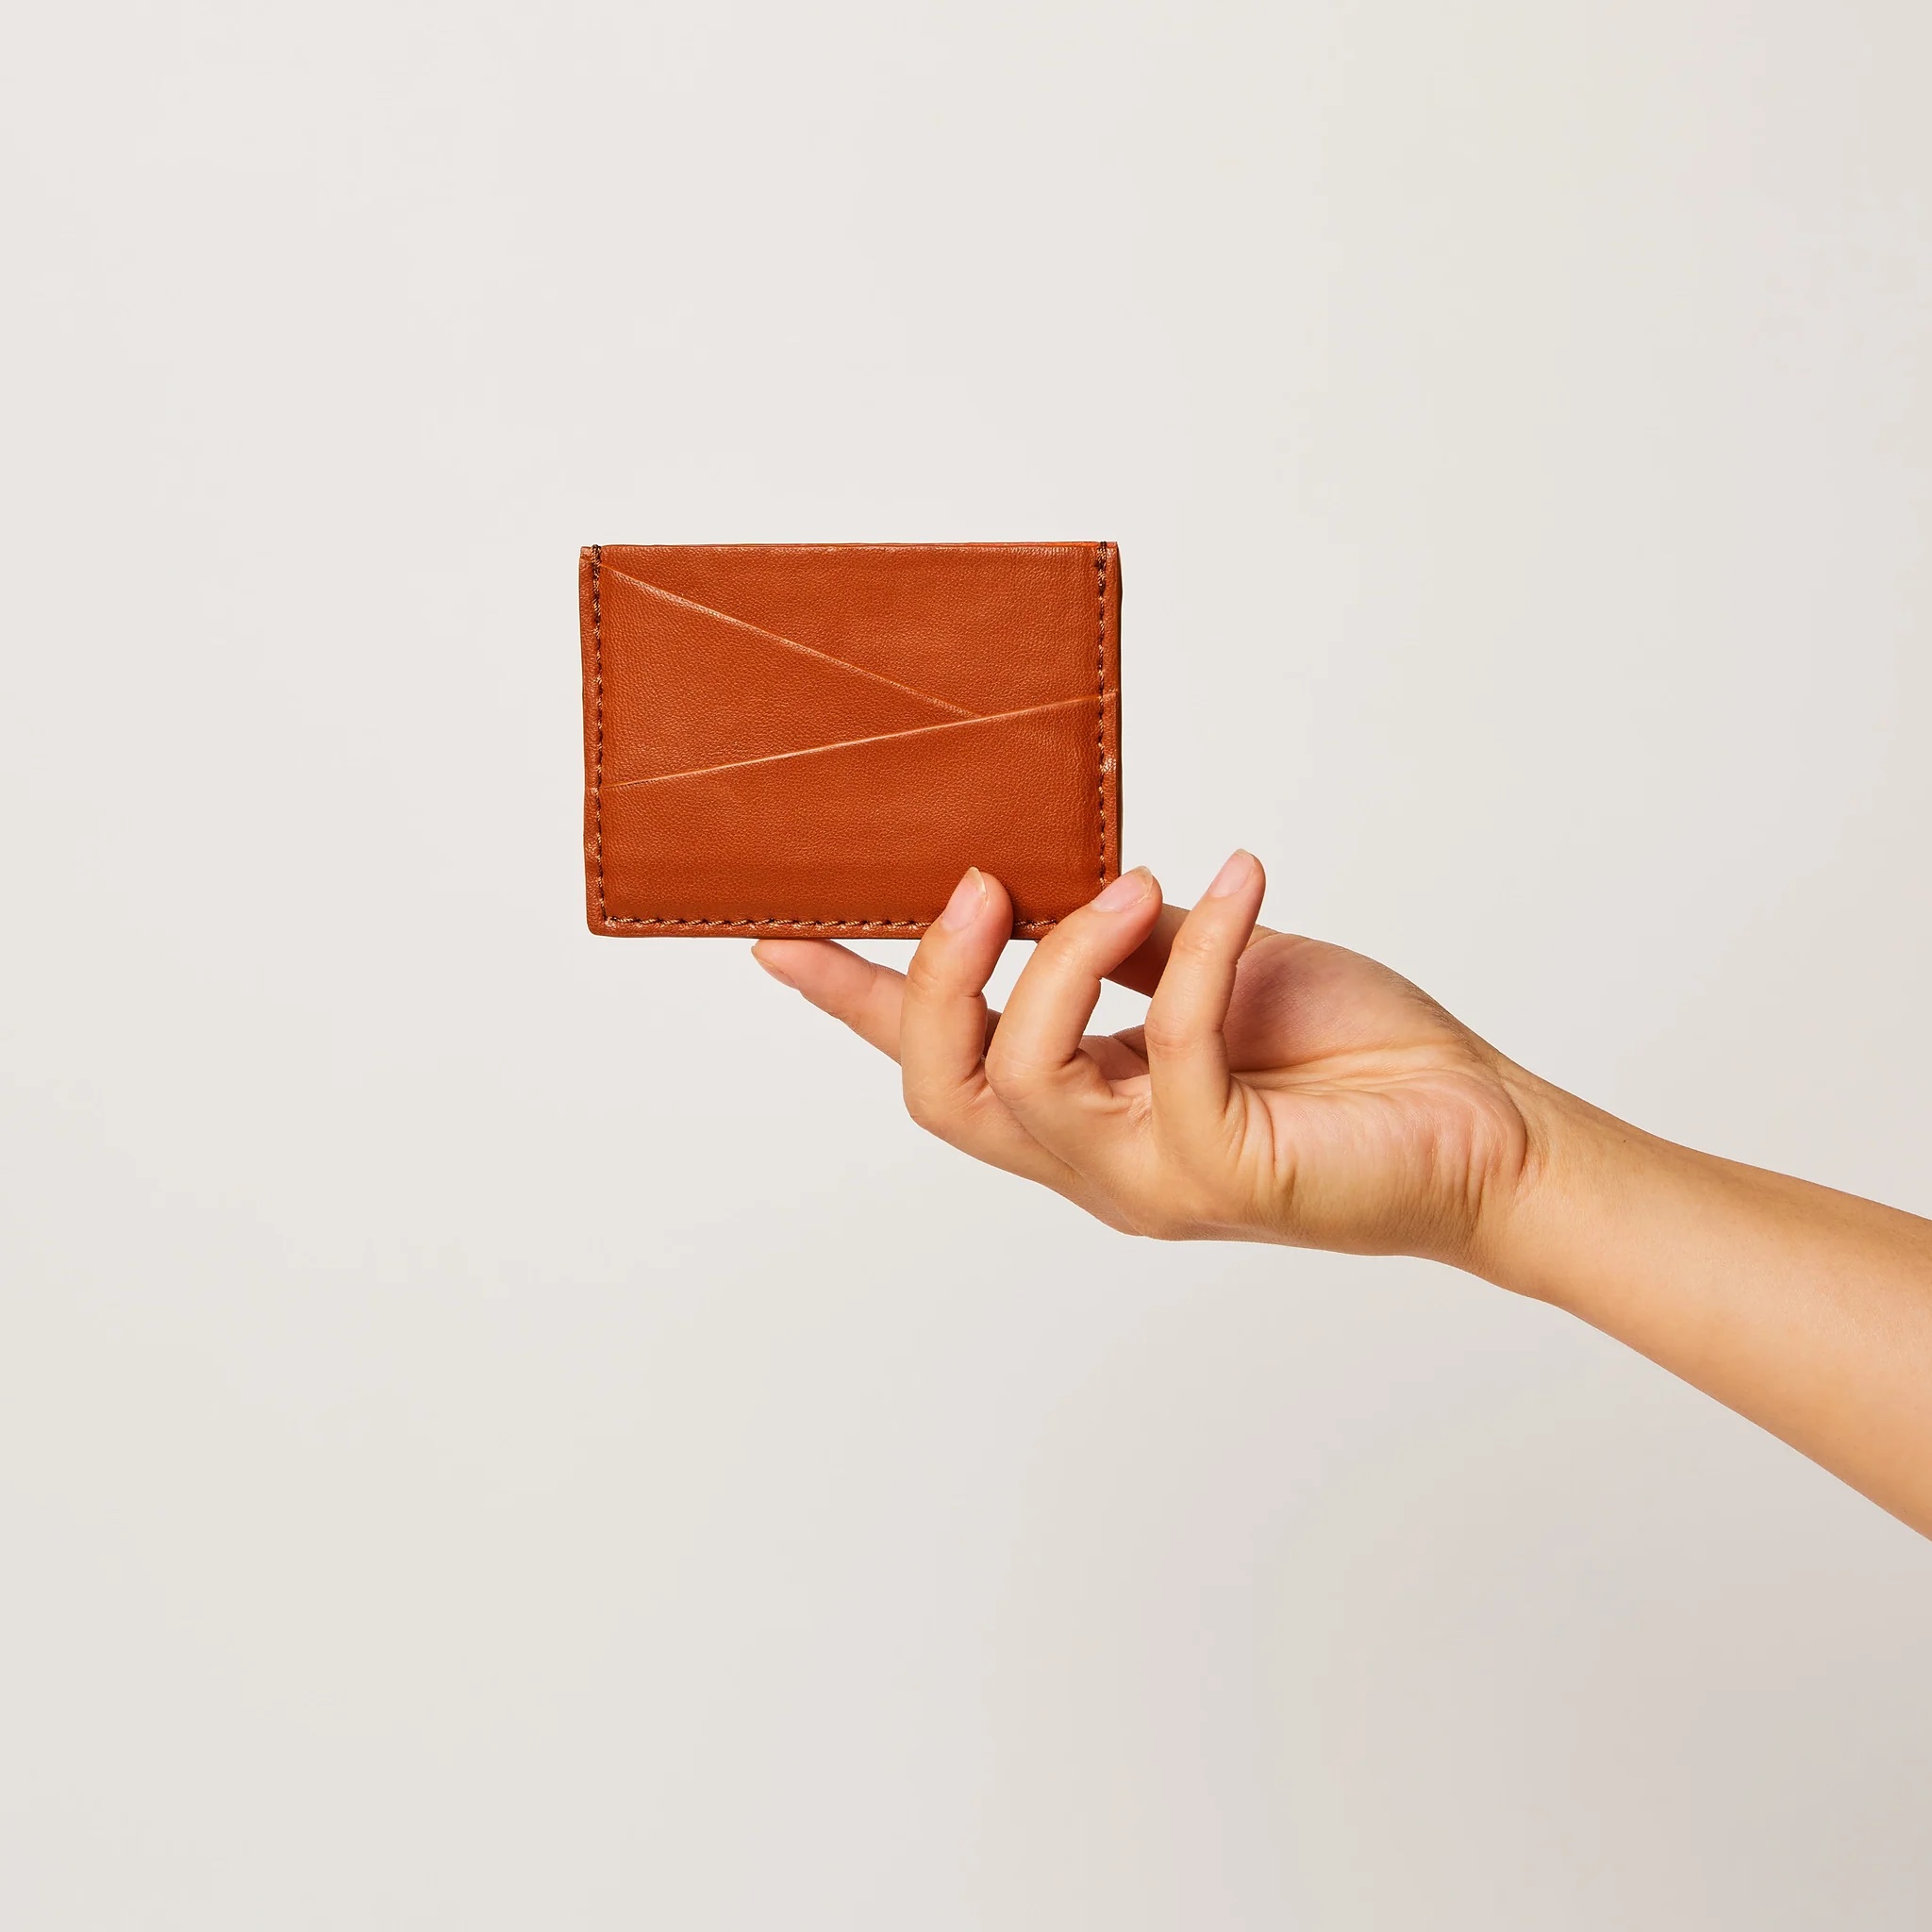 A hand holds out a brown wallet.